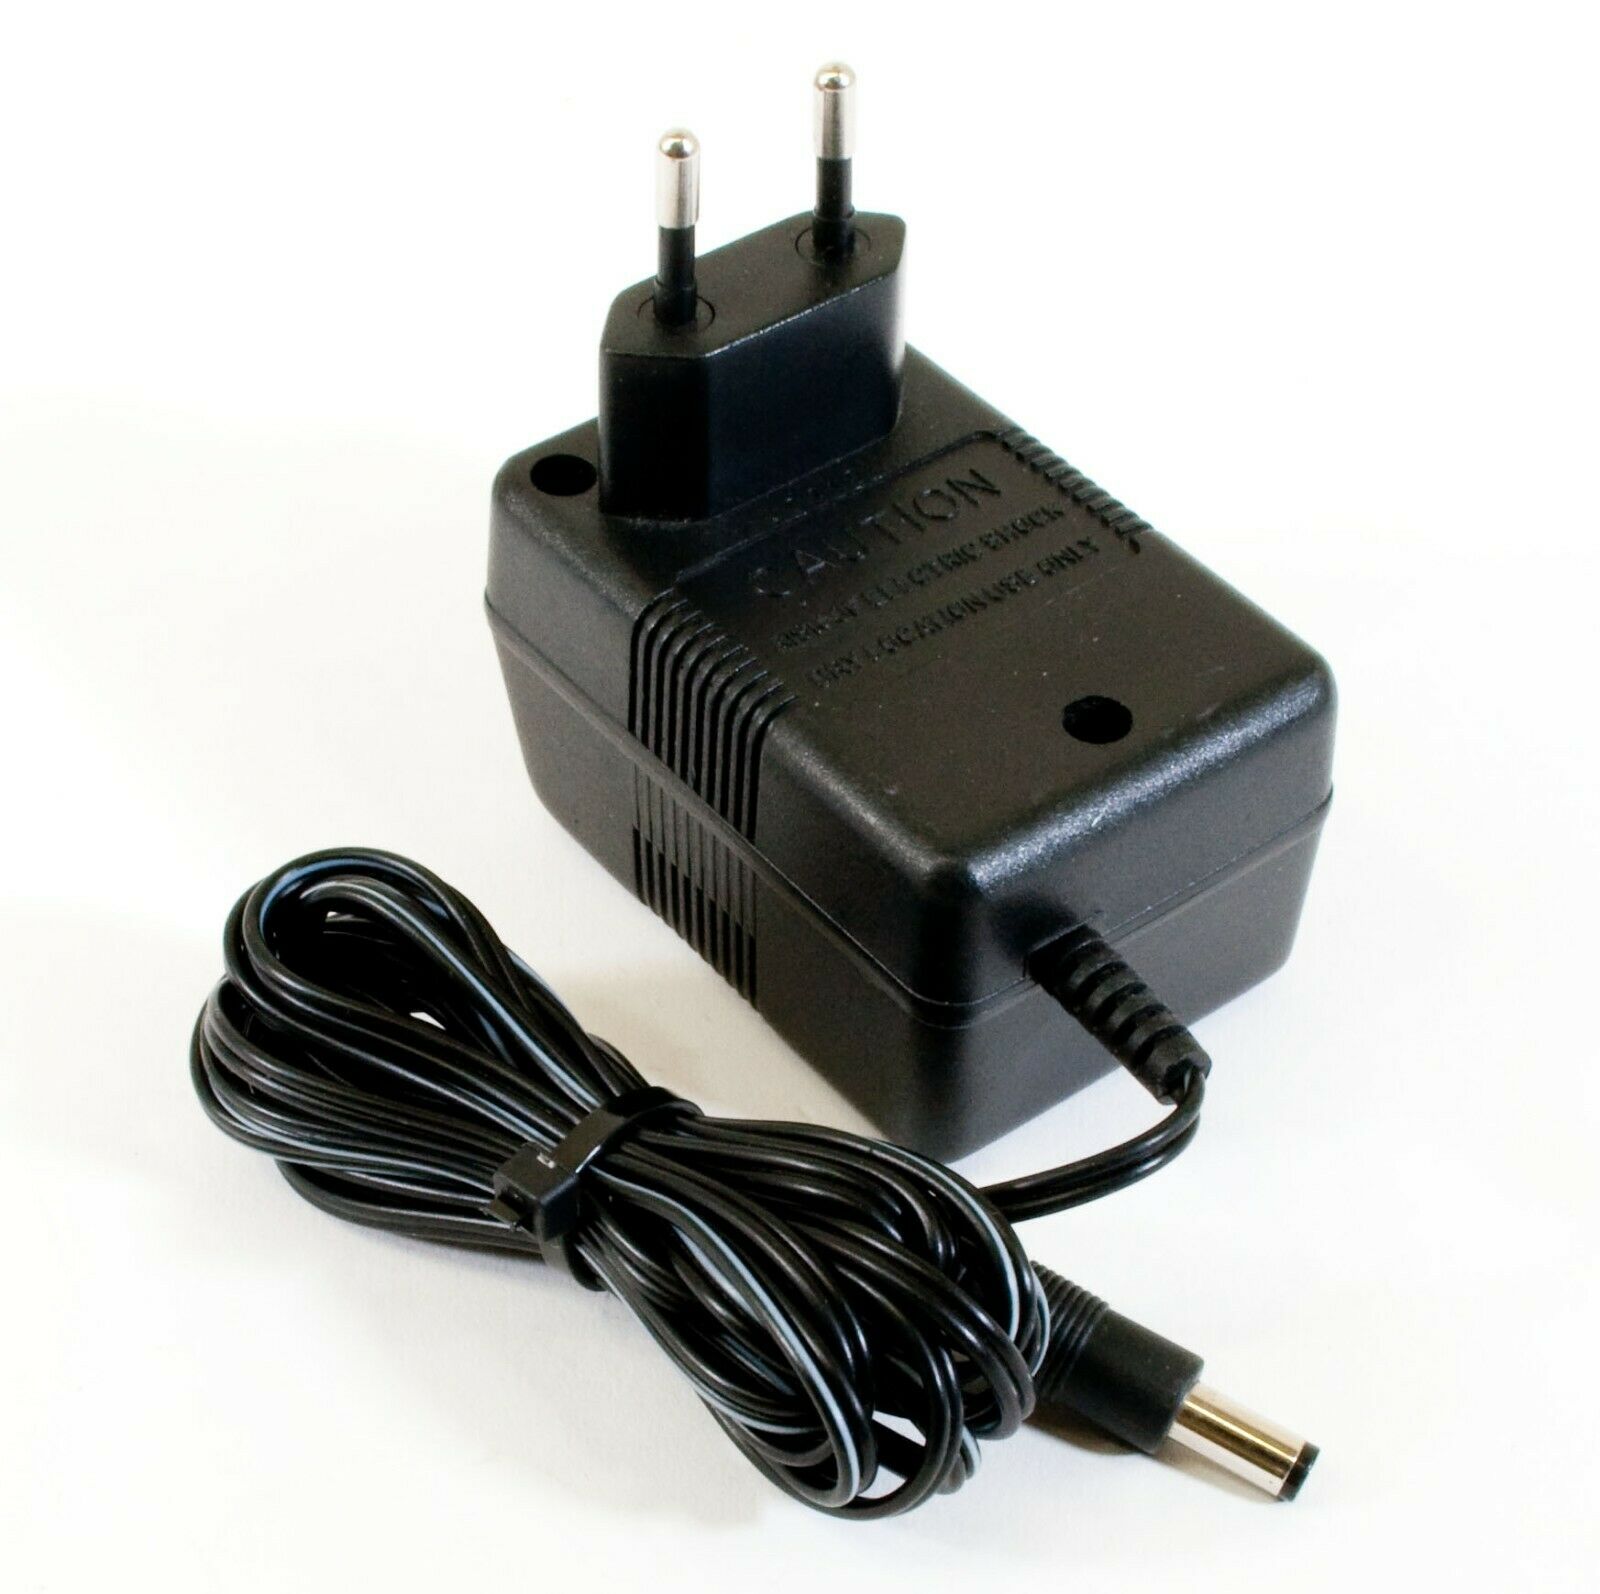 G090050D31 AC Adapter 9V 500mA Original Charger Power Supply Europlug Output Current: 500 mA Type: Power Adapter MPN: - Click Image to Close